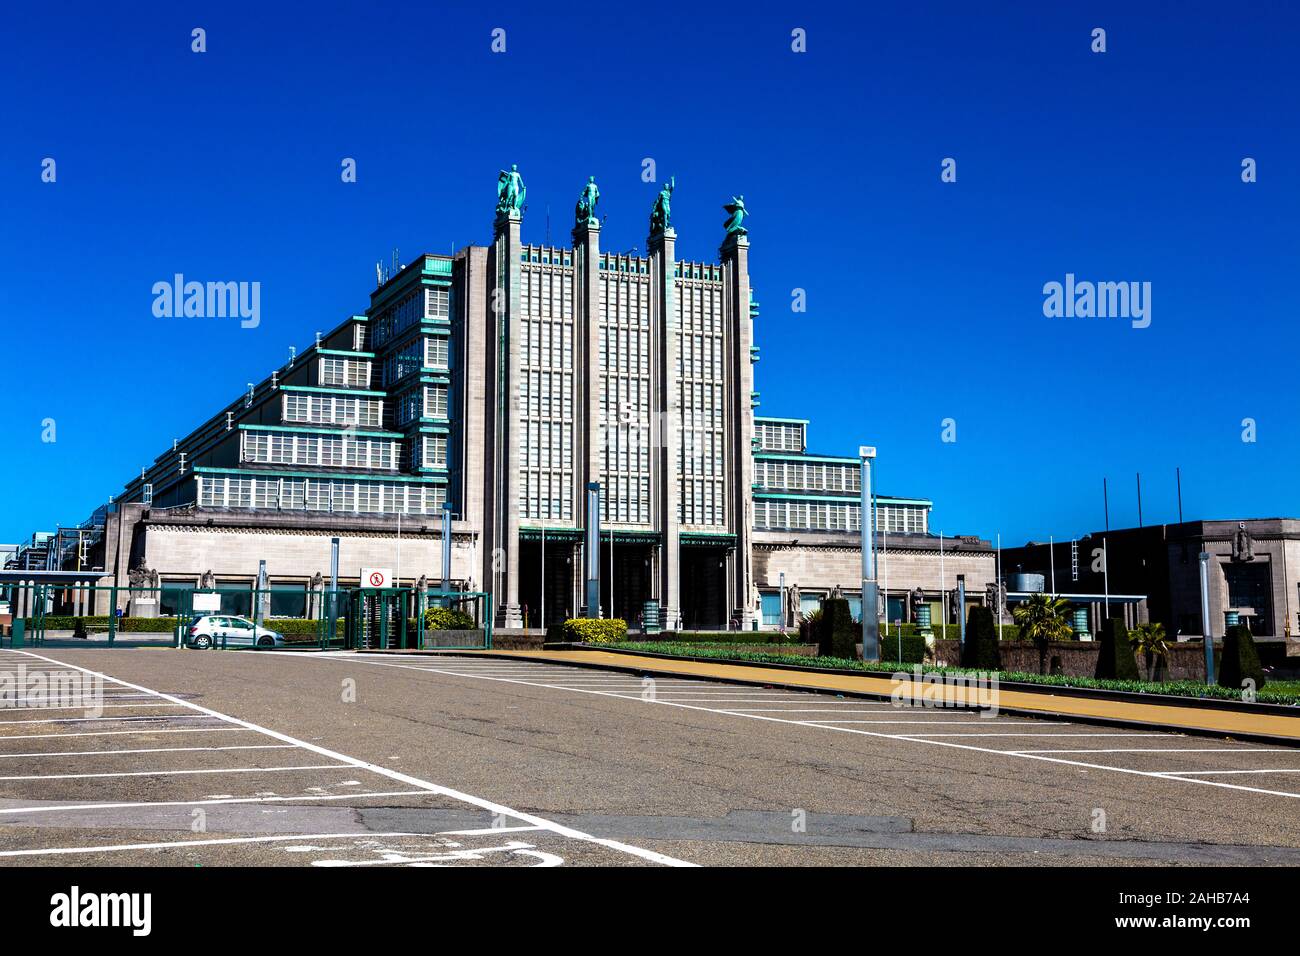 Facade the art deco Brussels Expo building no 5 (Centenary Palace) in the Heysel Park, Brussels, Belgium Stock Photo